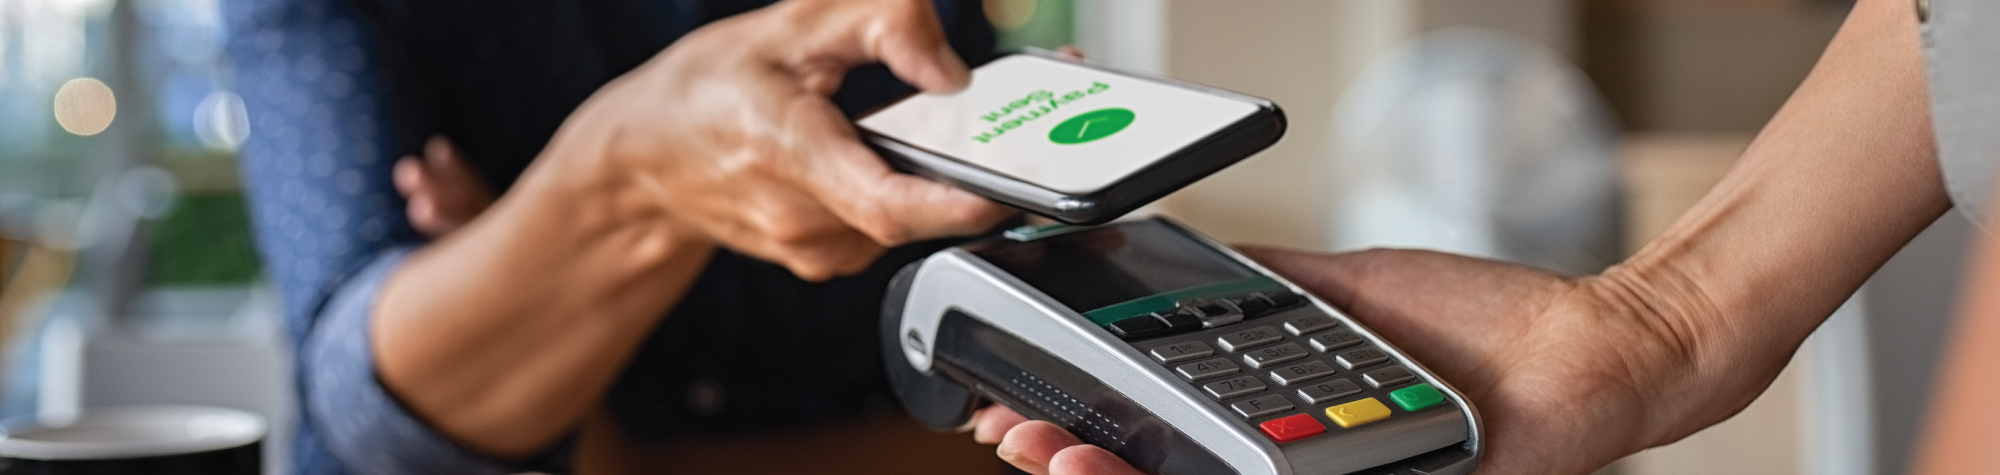 Accepting Mobile Payments at Your Business: The Advantages